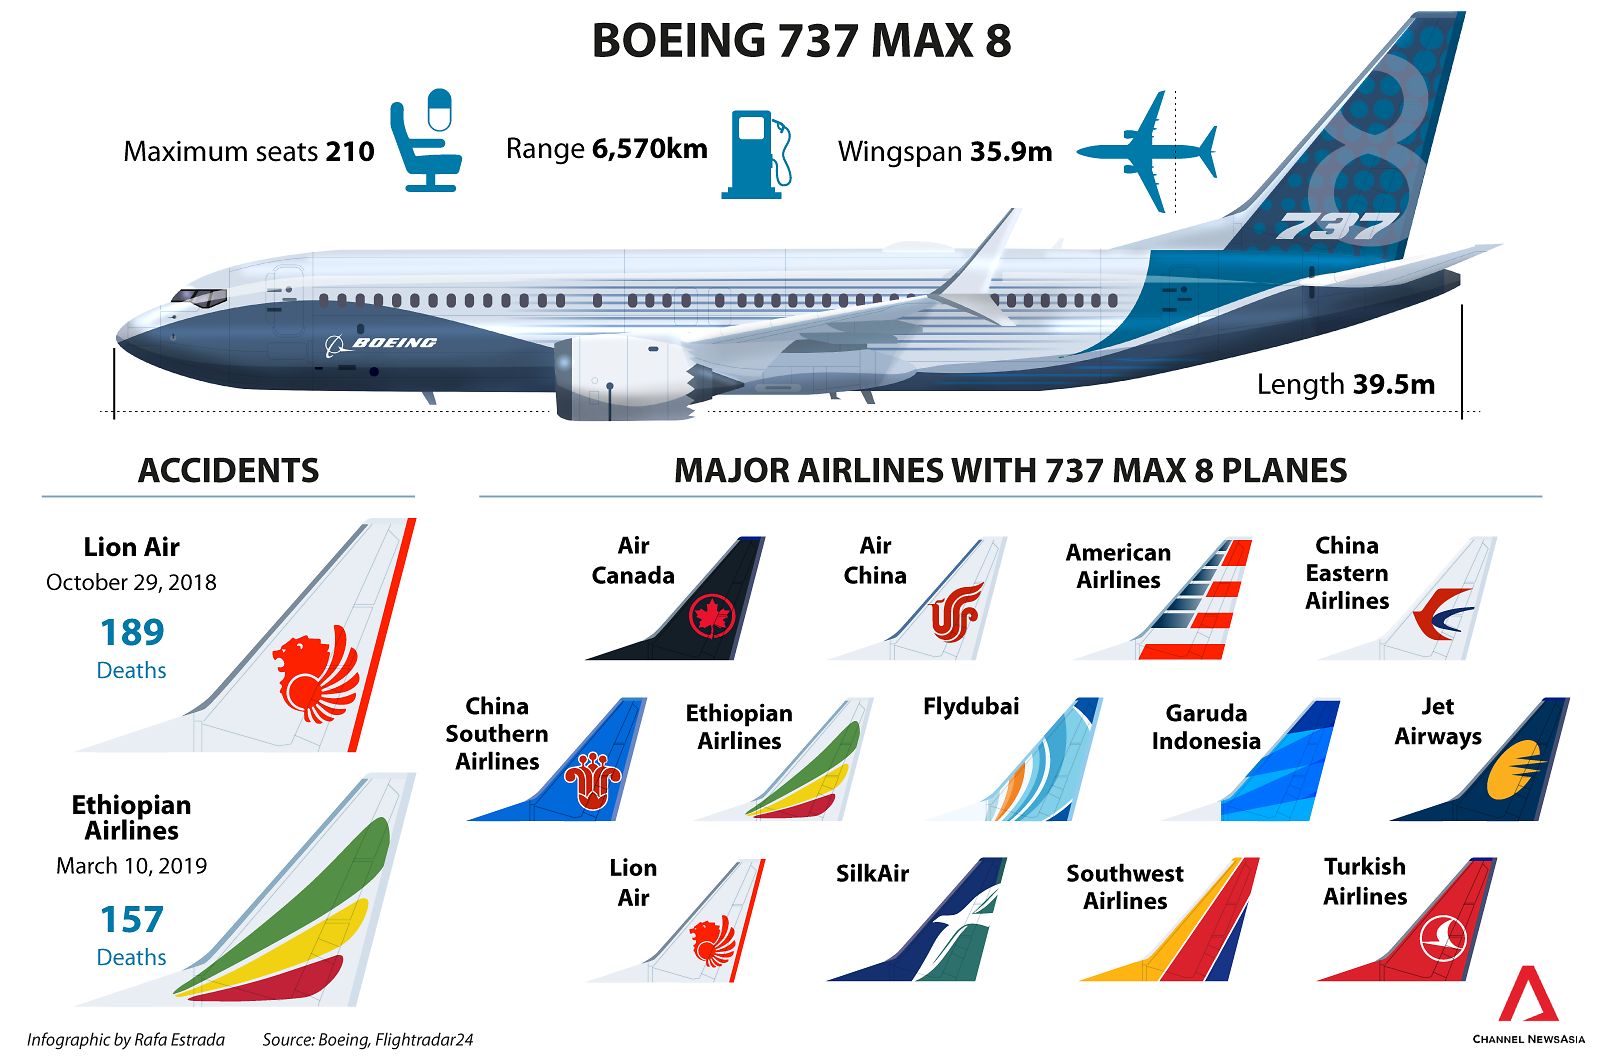 boeing-737-max-8-plane-which-airlines-have-it-in-their-fleet